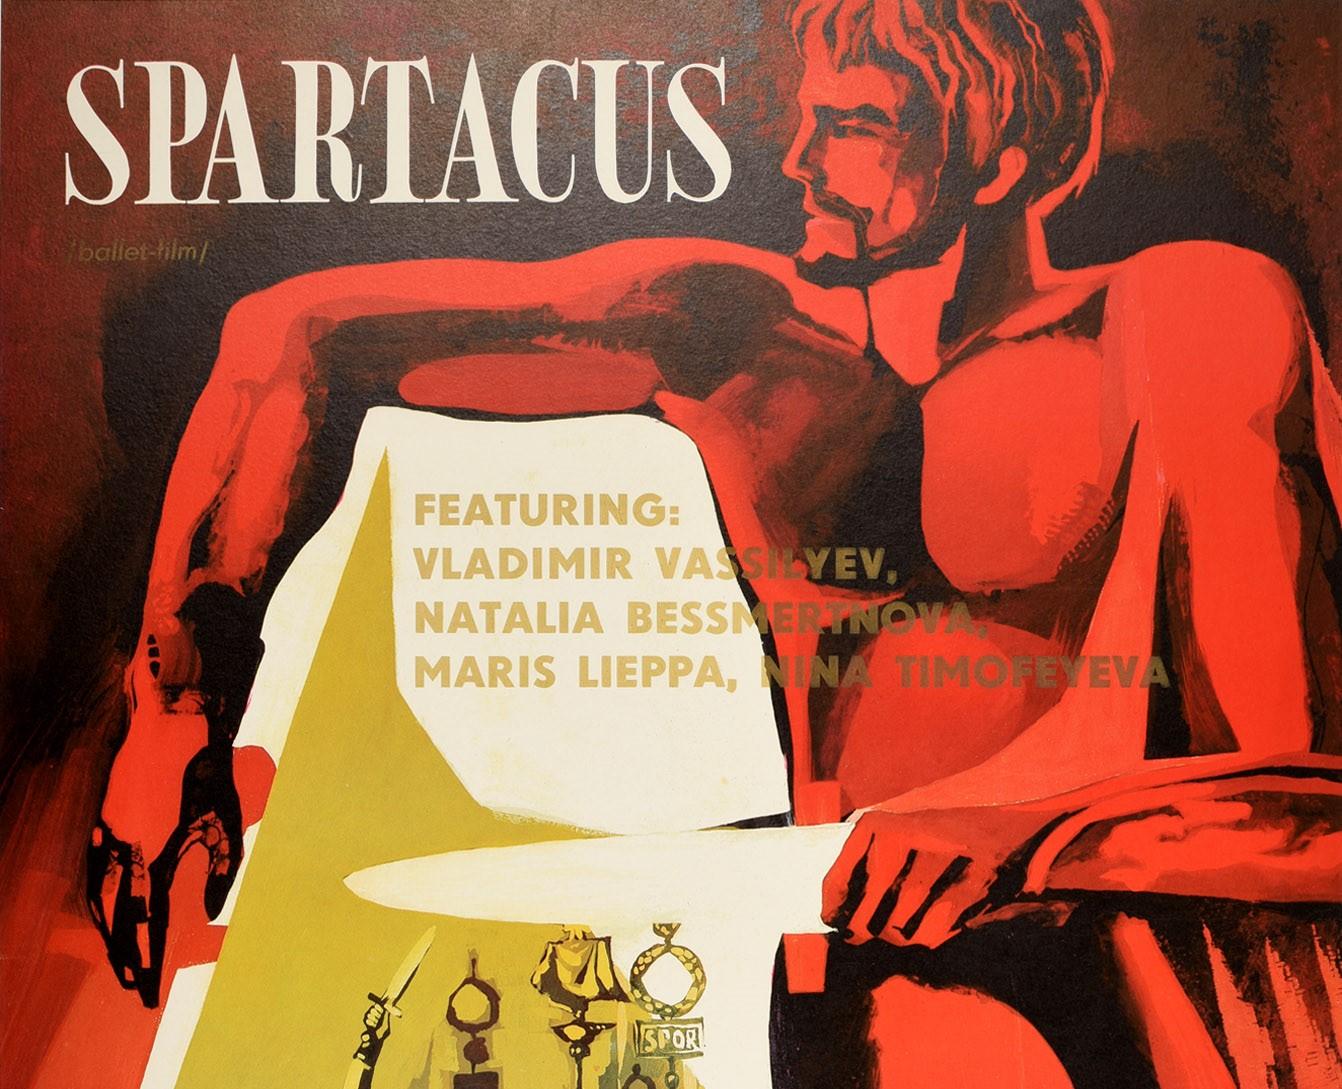 Original vintage Soviet film poster for the Bolshoi Ballet performance of Spartacus directed by Vadim Derbenyov and Yuri Grigorovich and featuring Vladimir Vasilev (b.1940) as the gladiator Spartacus who led the slave uprising against the Romans,